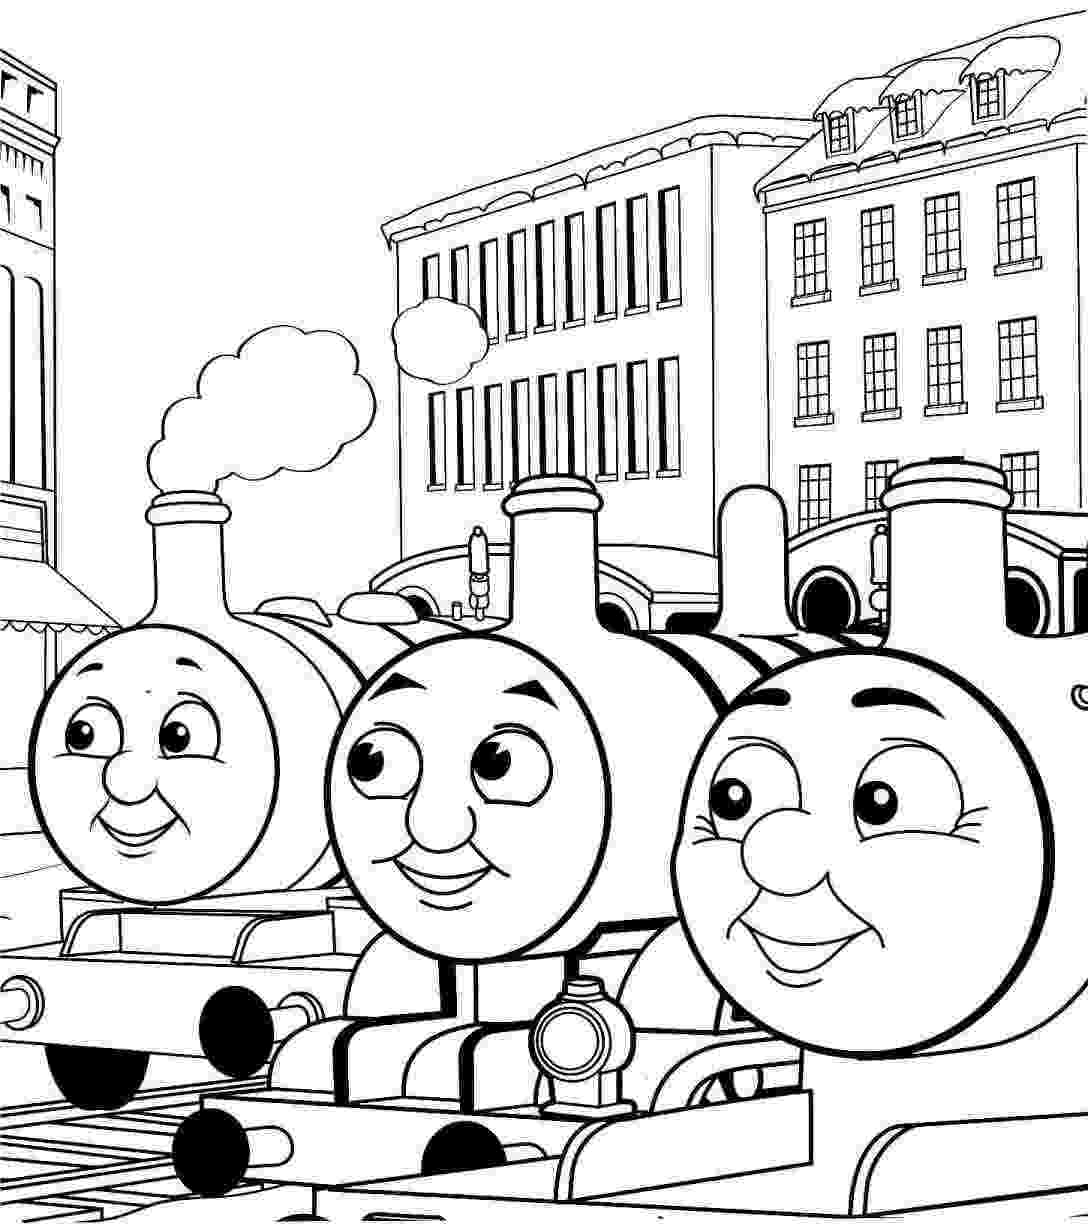 thomas and friends coloring pages emily from thomas friends coloring page free printable friends and pages thomas coloring 